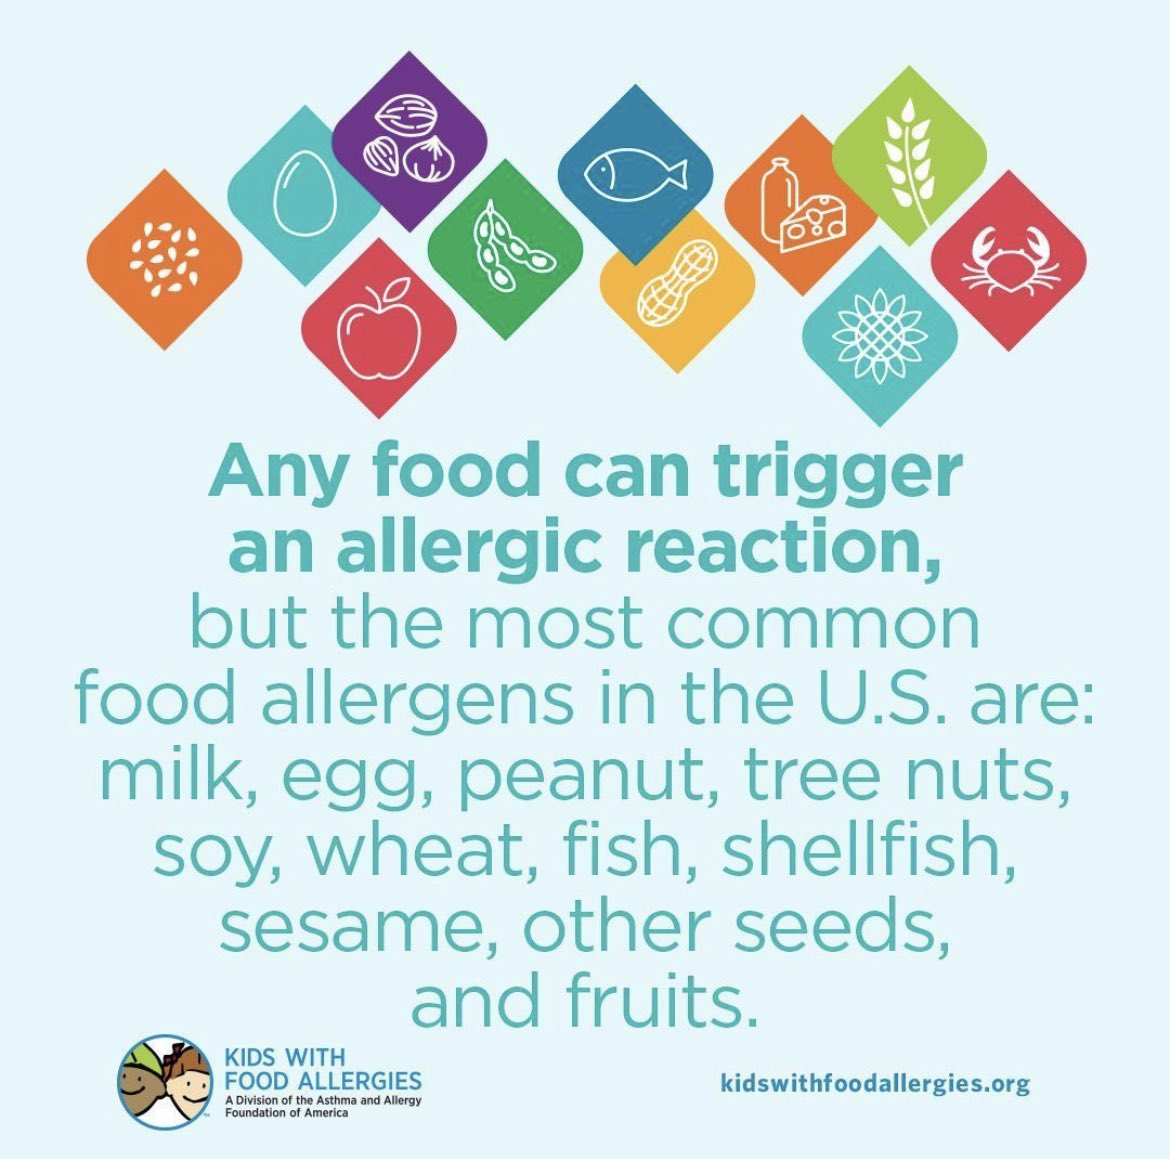 Do you know the signs and symptoms of an anaphylactic reaction? 

Check out the facts and be sure to #KnowItTreatIt. 

Contact our free clinic for complete allergy testing!

#stlclinic #strengthtolove #foodallergyawarenessweek
#foodallergy 
#allergyaware